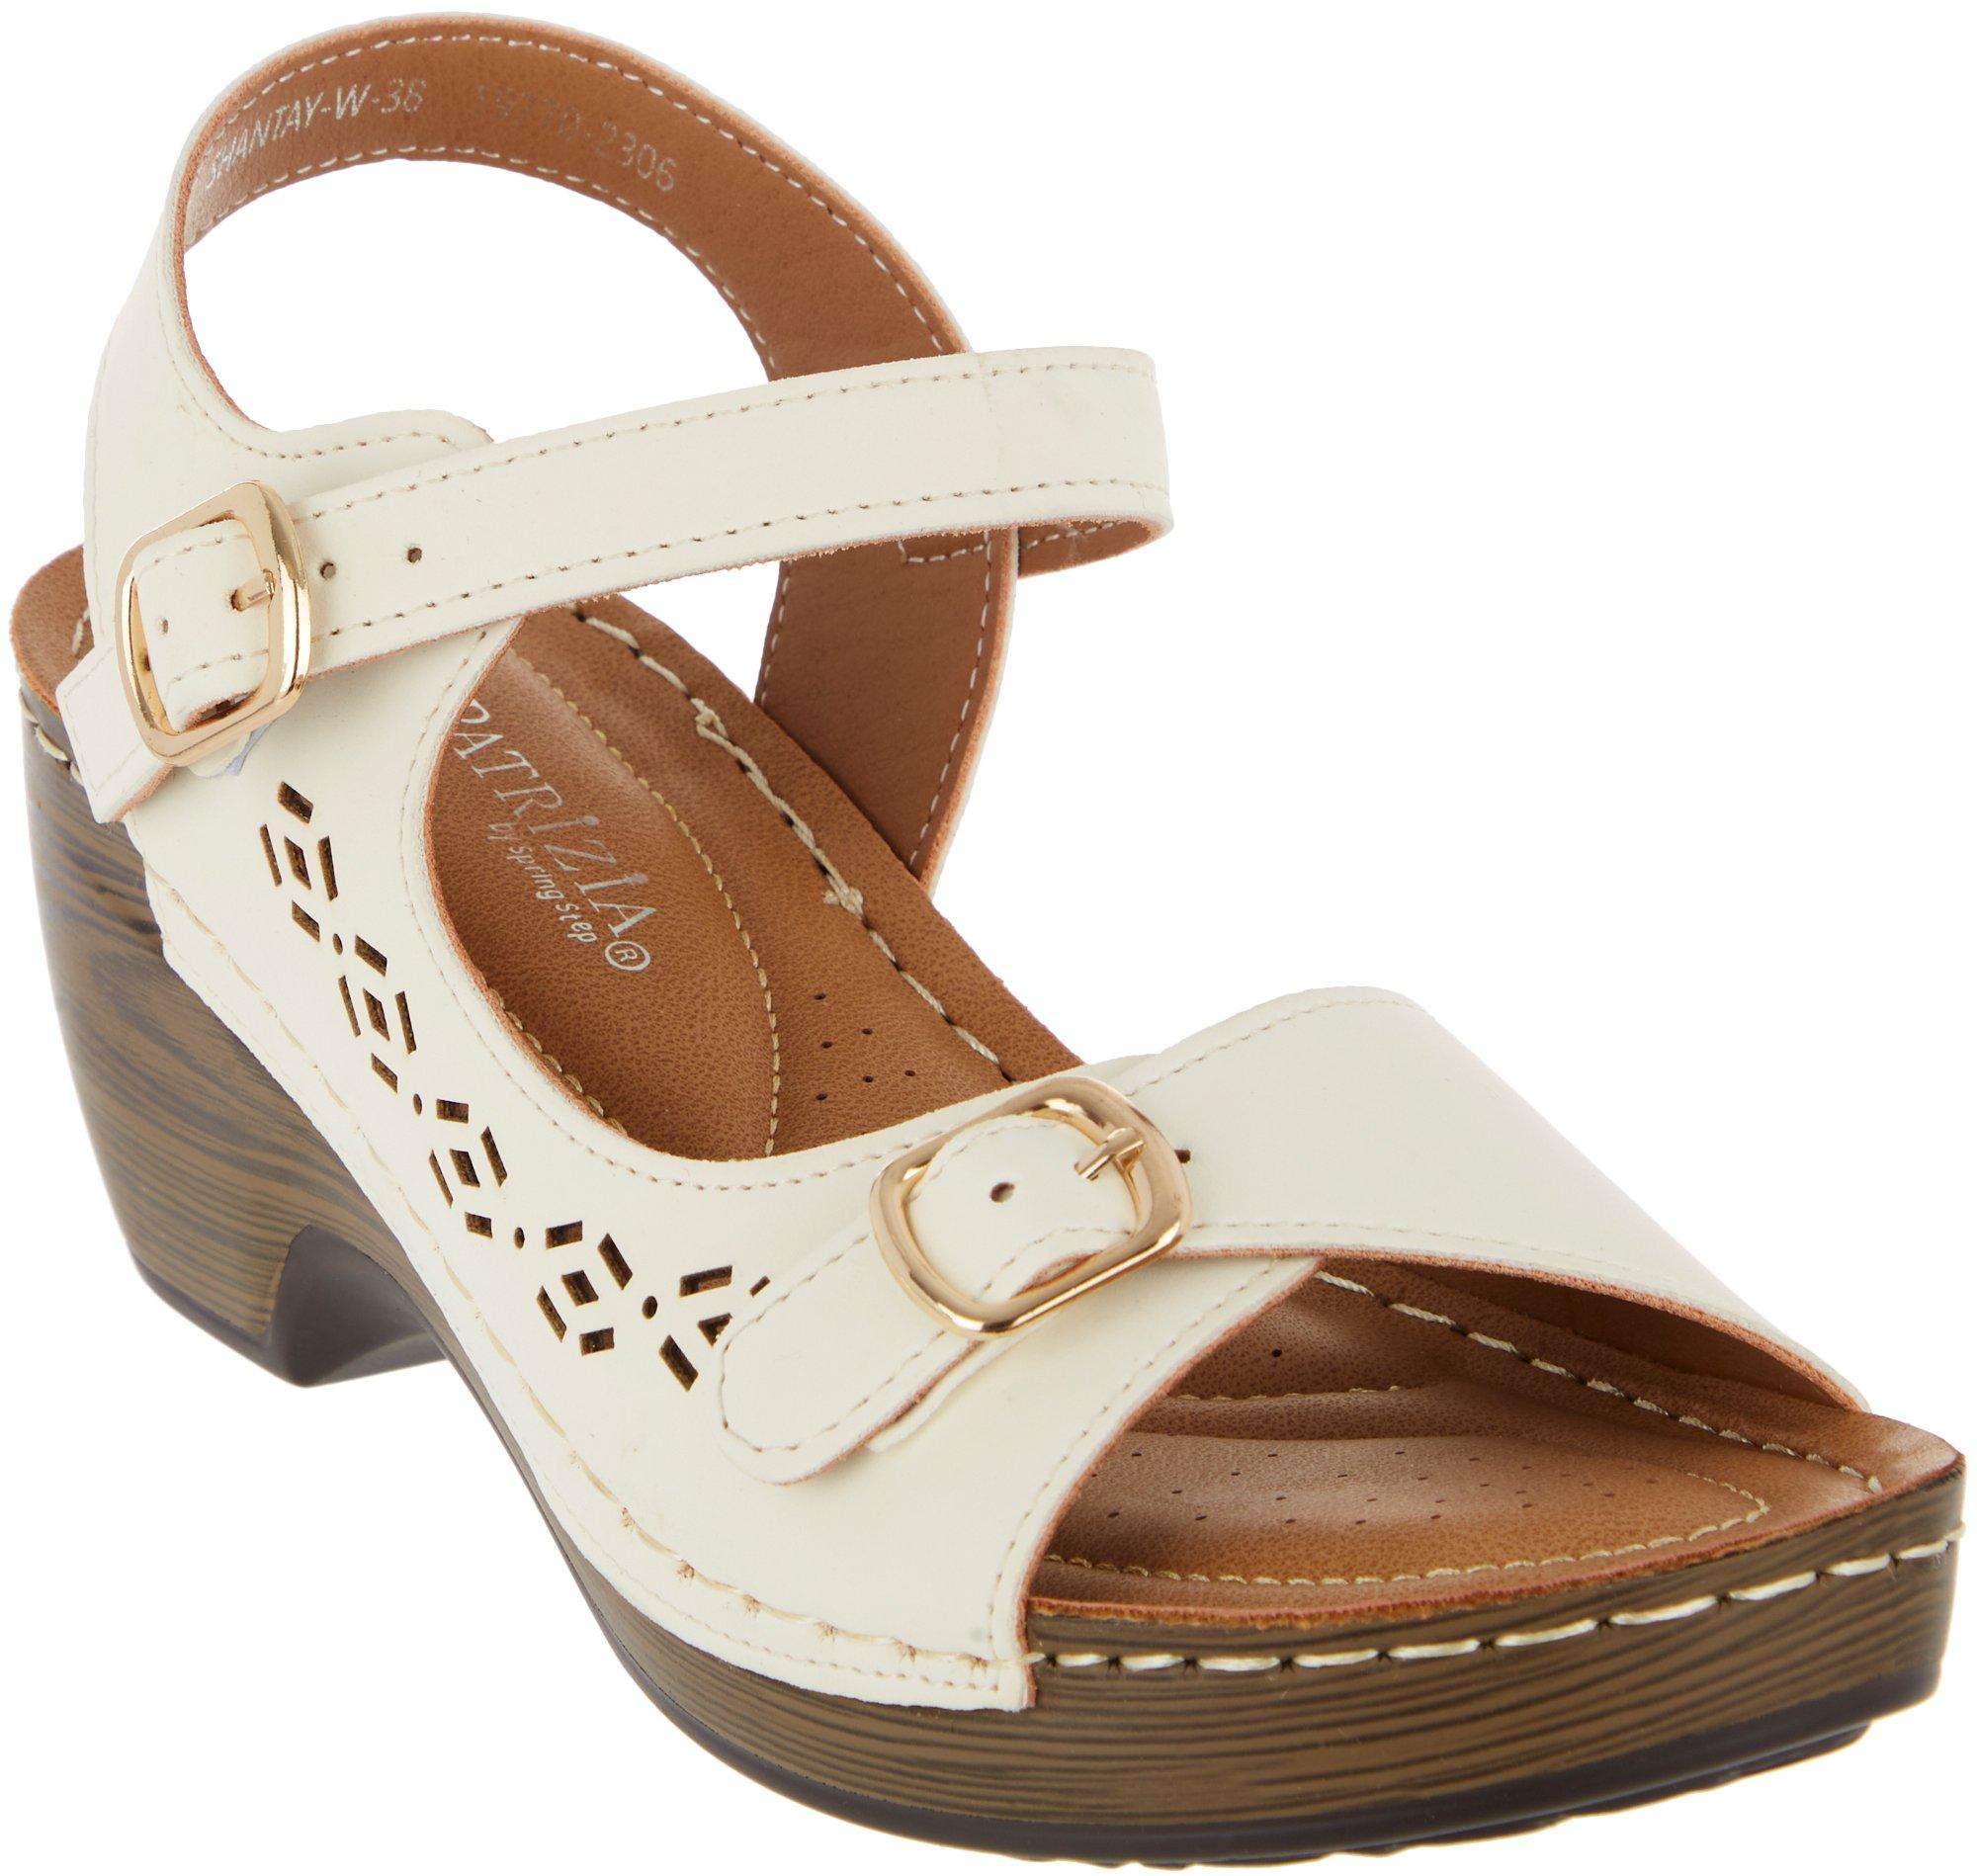 Women's Perforated Lifted Sandals